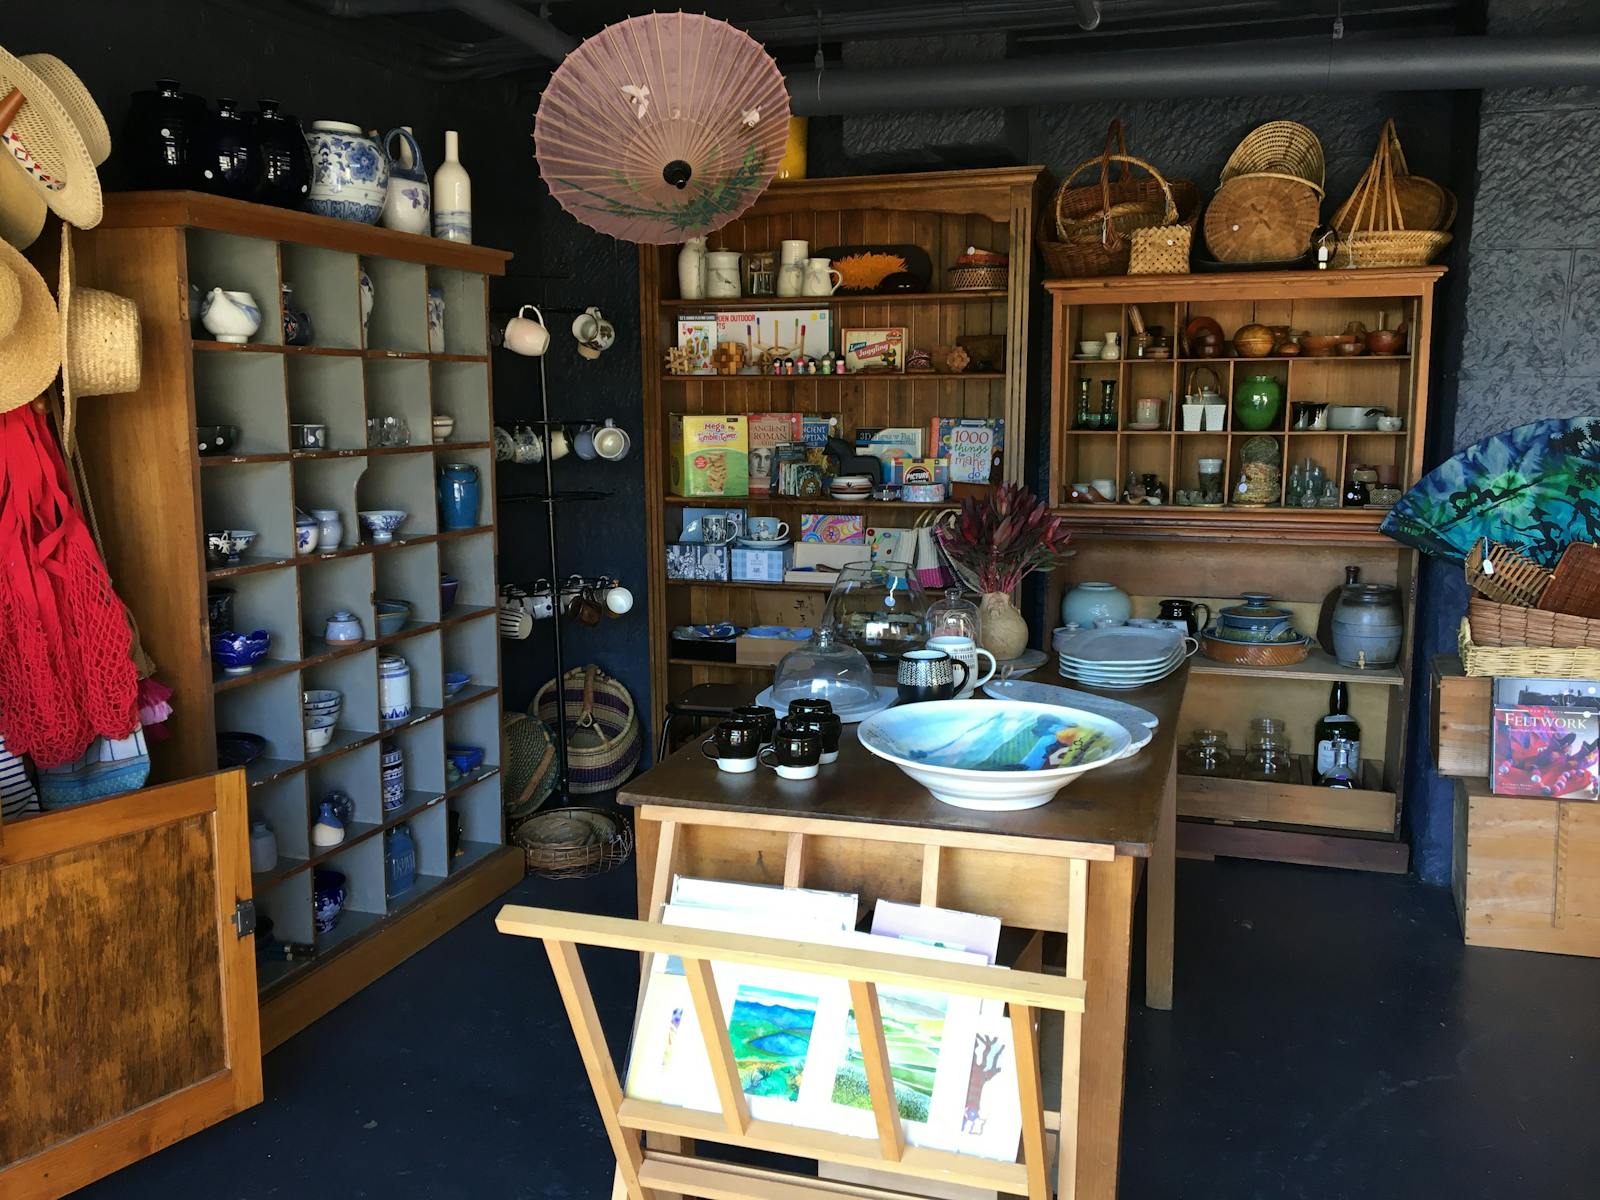 AssemblageCurated is our onsite art, design and homewares store, located in the rear courtyard.